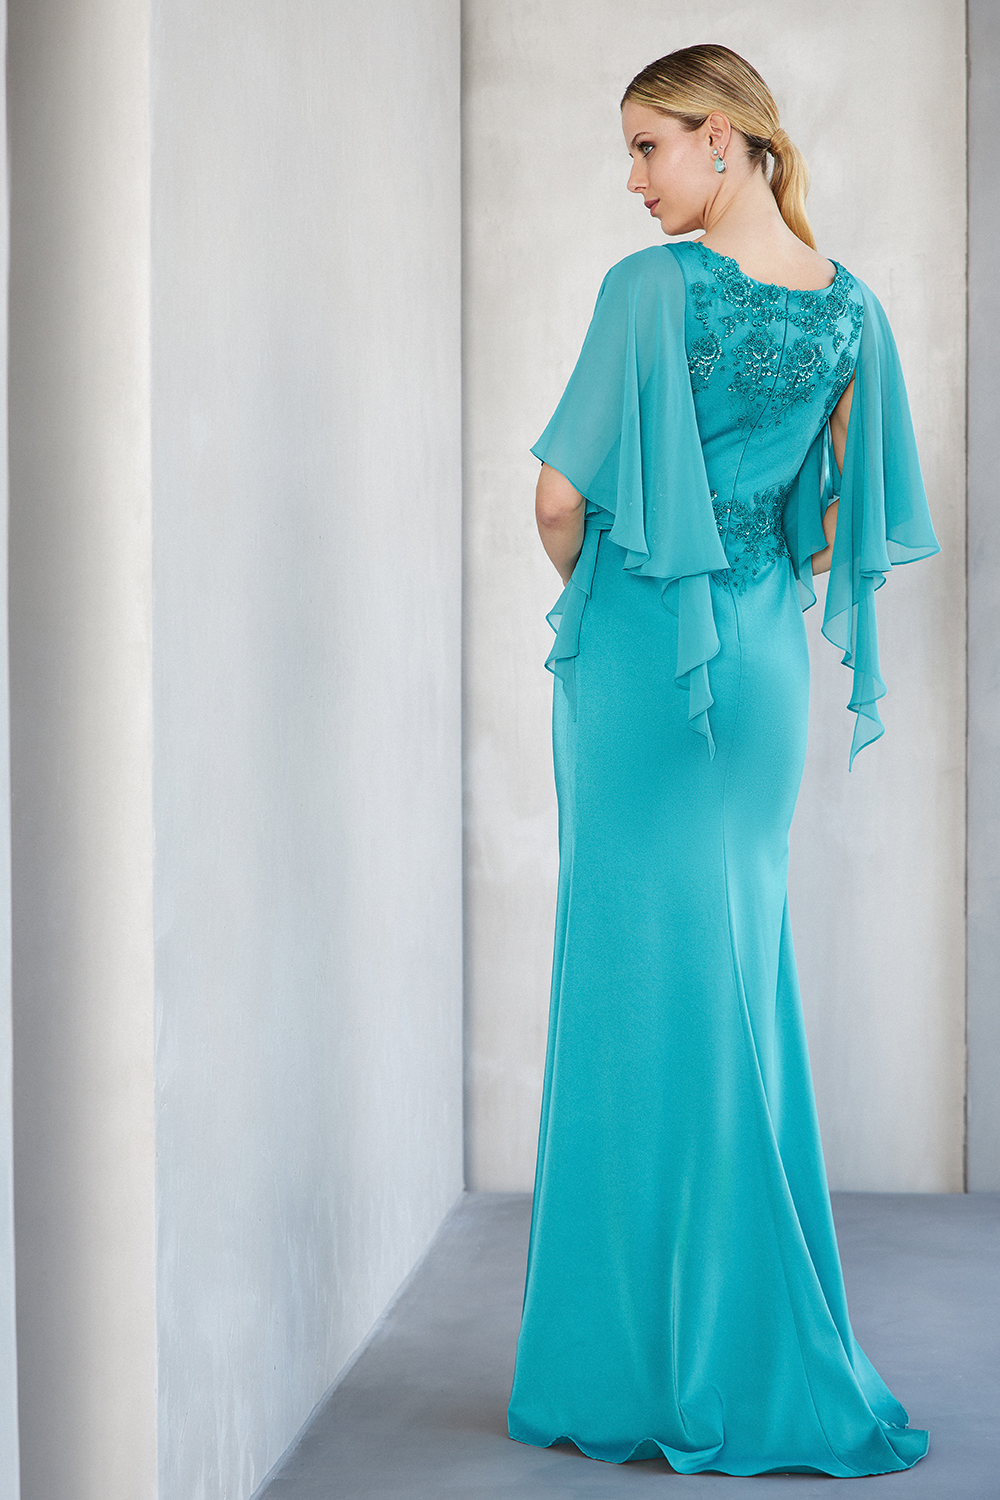 Classic Dresses / Long evening satin dress with beaded top and sleeves with tulle